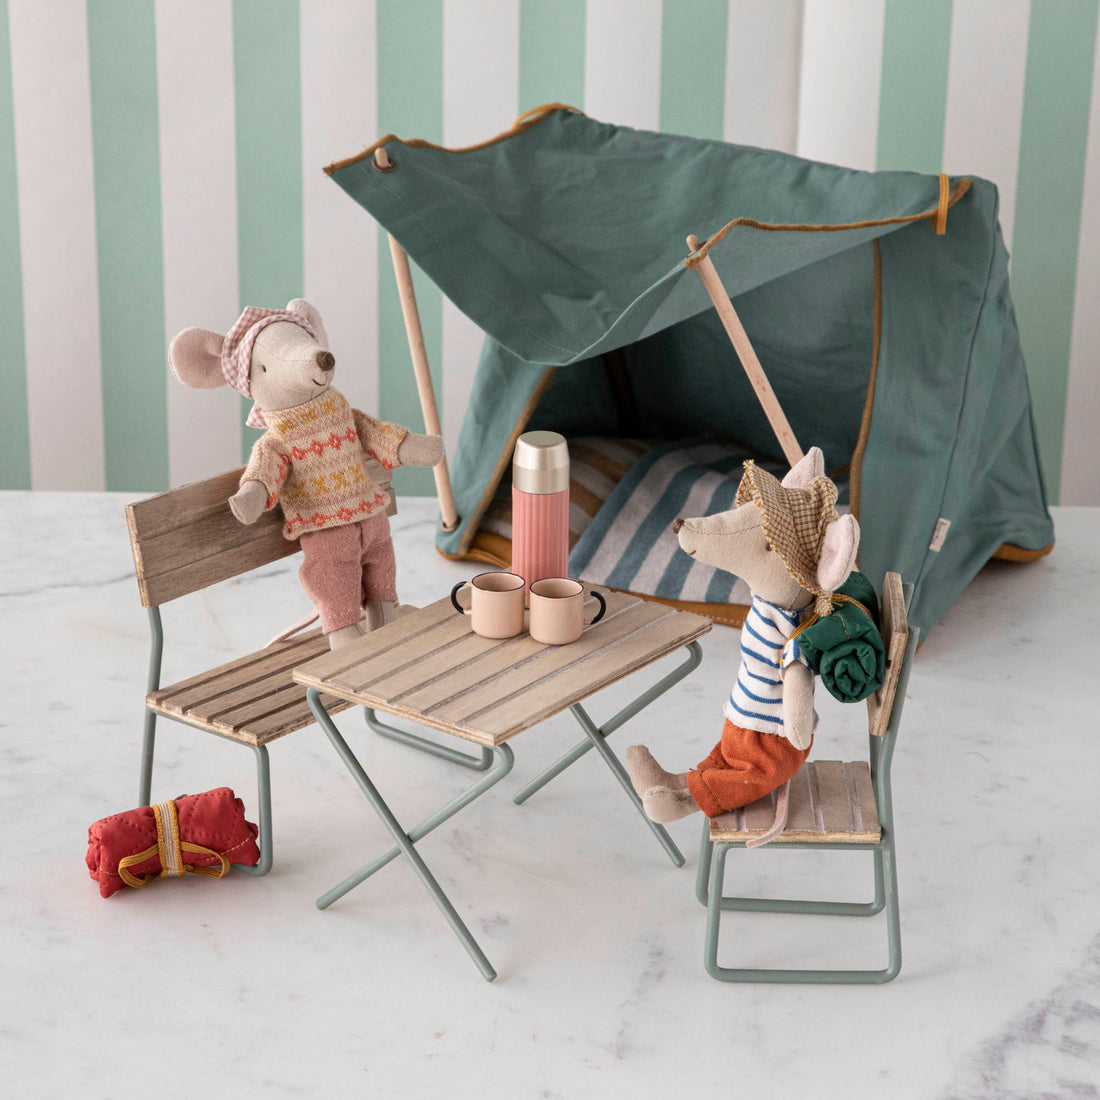 Two Mini Garden Sets from Maileg, each featuring stuffed toy mice dressed in clothes and simulating a camping scene with miniature camping equipment made from FSC certified wood.